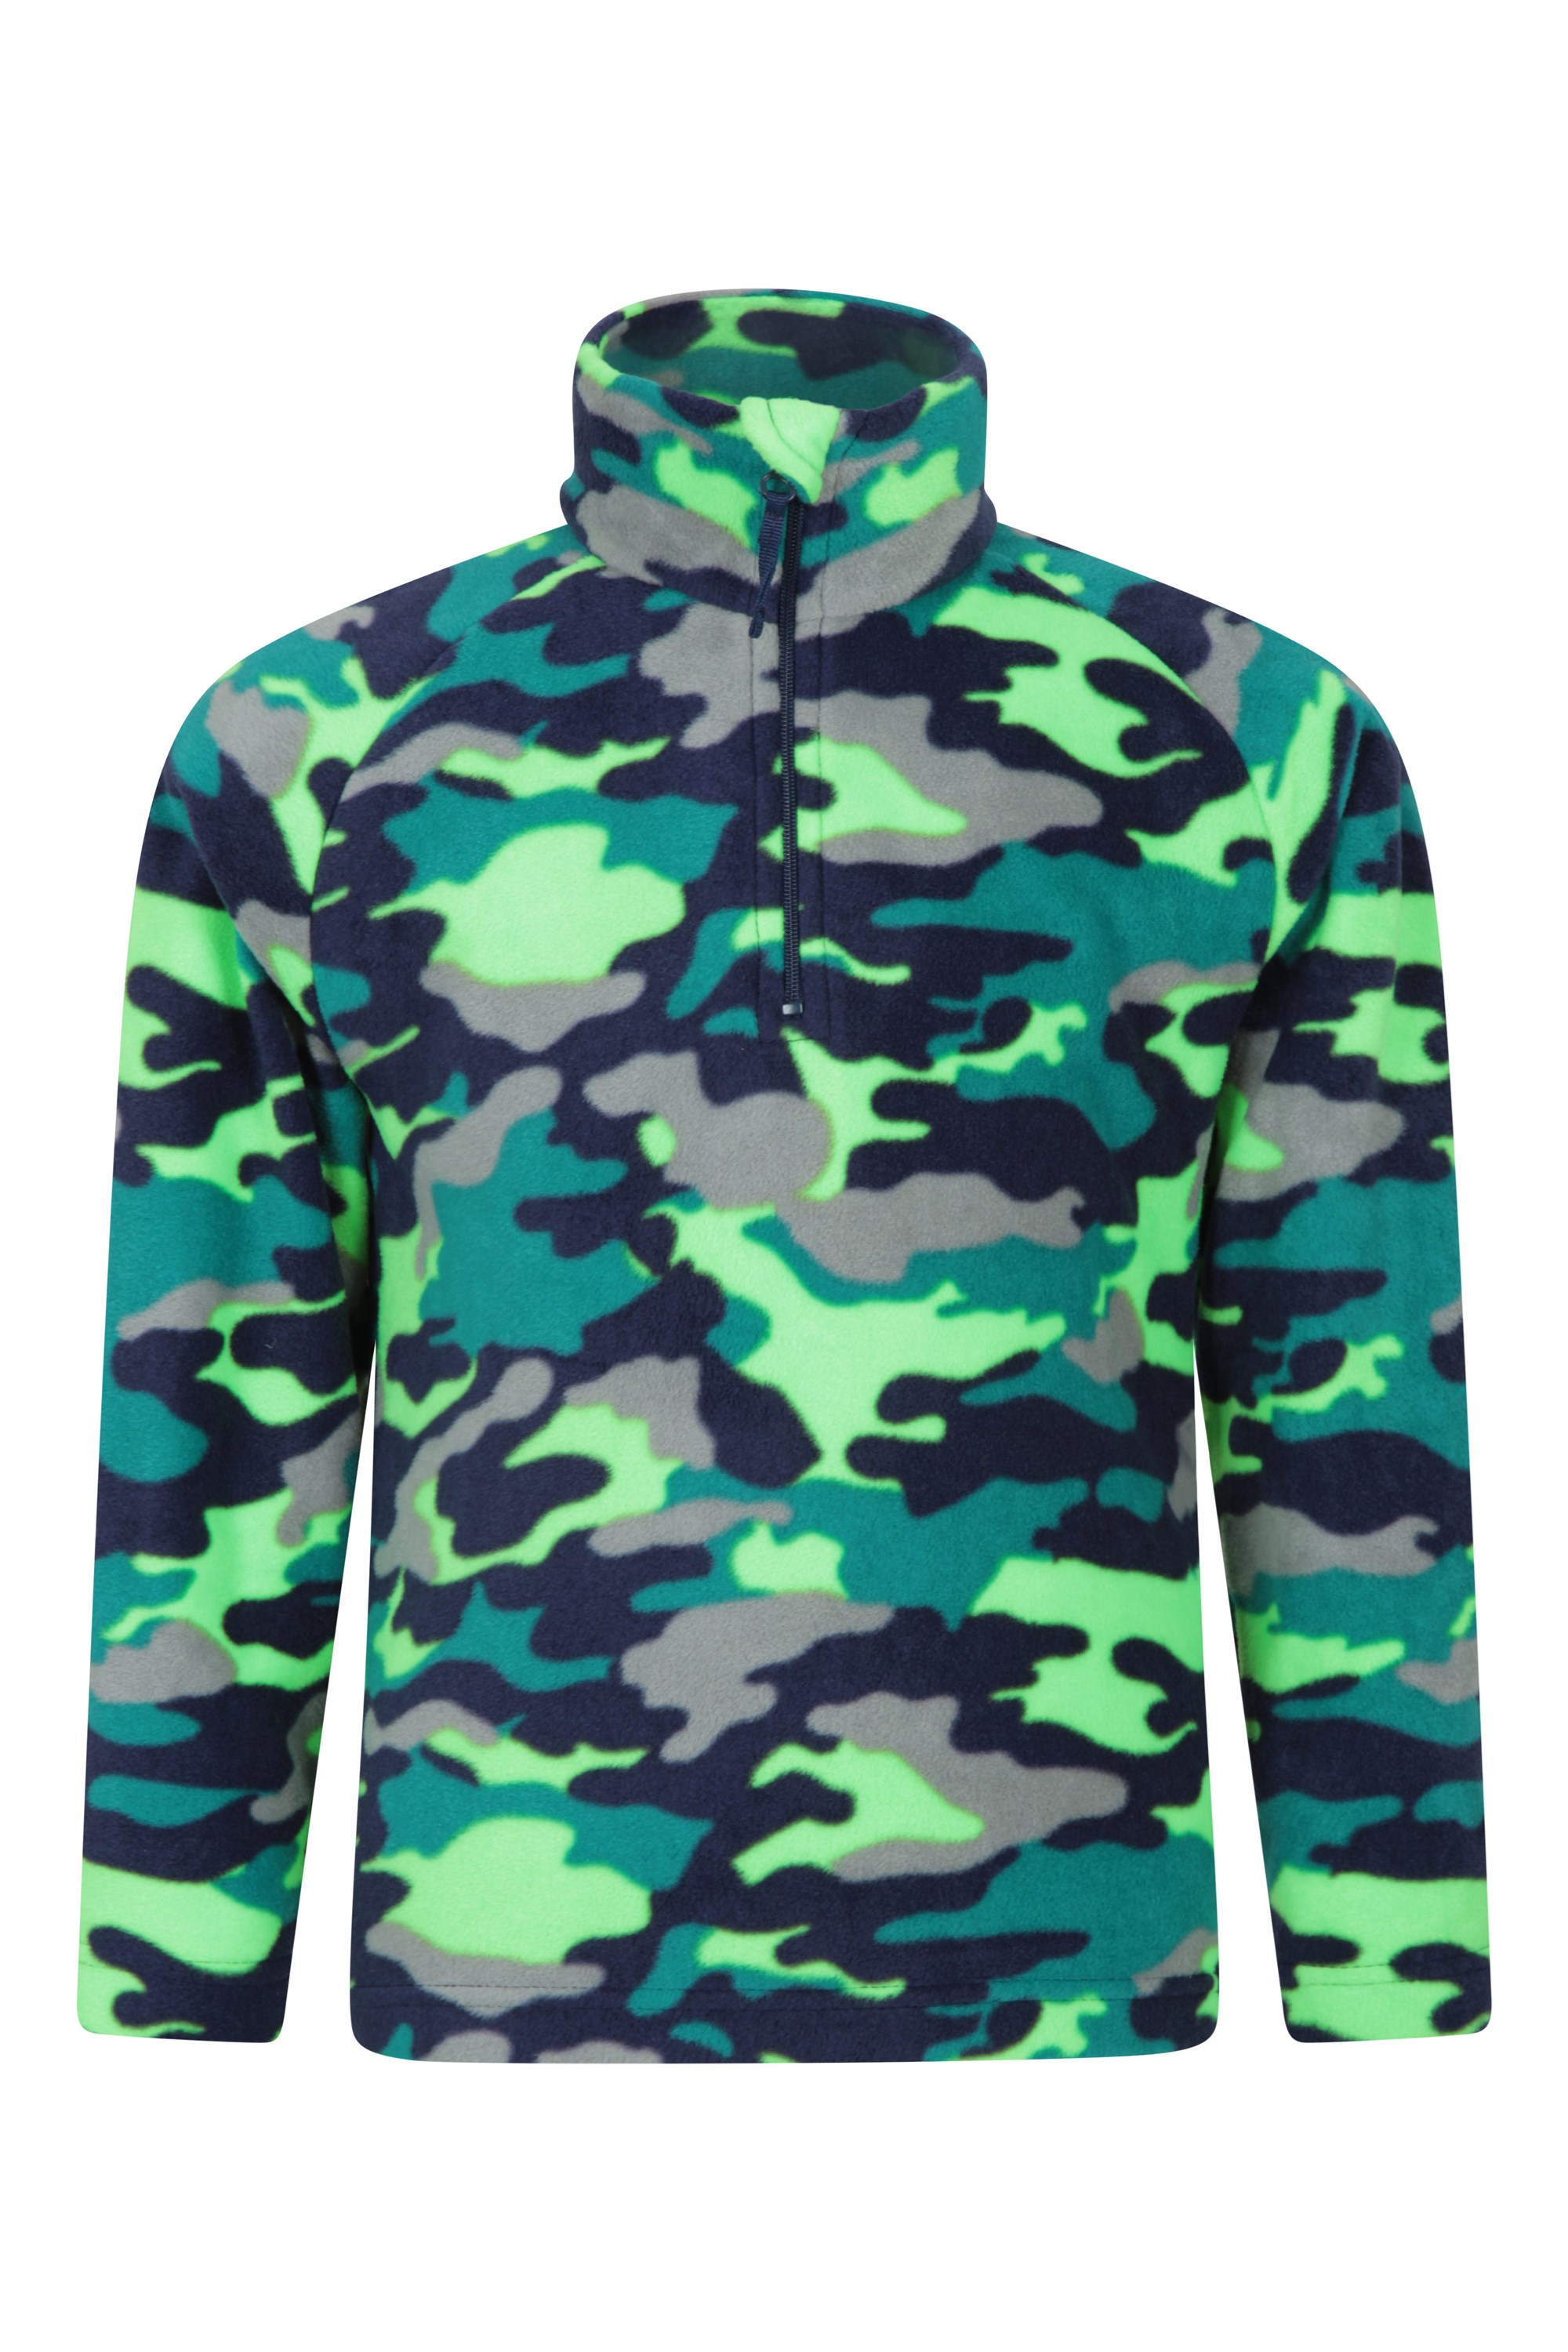 Marque : Mountain WarehouseMountain Warehouse Pursuit Printed Kids Fleece Microfleece Girls & Boys Sweater Quick Dry Multipack Travelling & Hiking Camouflage 7-8 Ans Lightweight Best for Daily Use Outdoors 